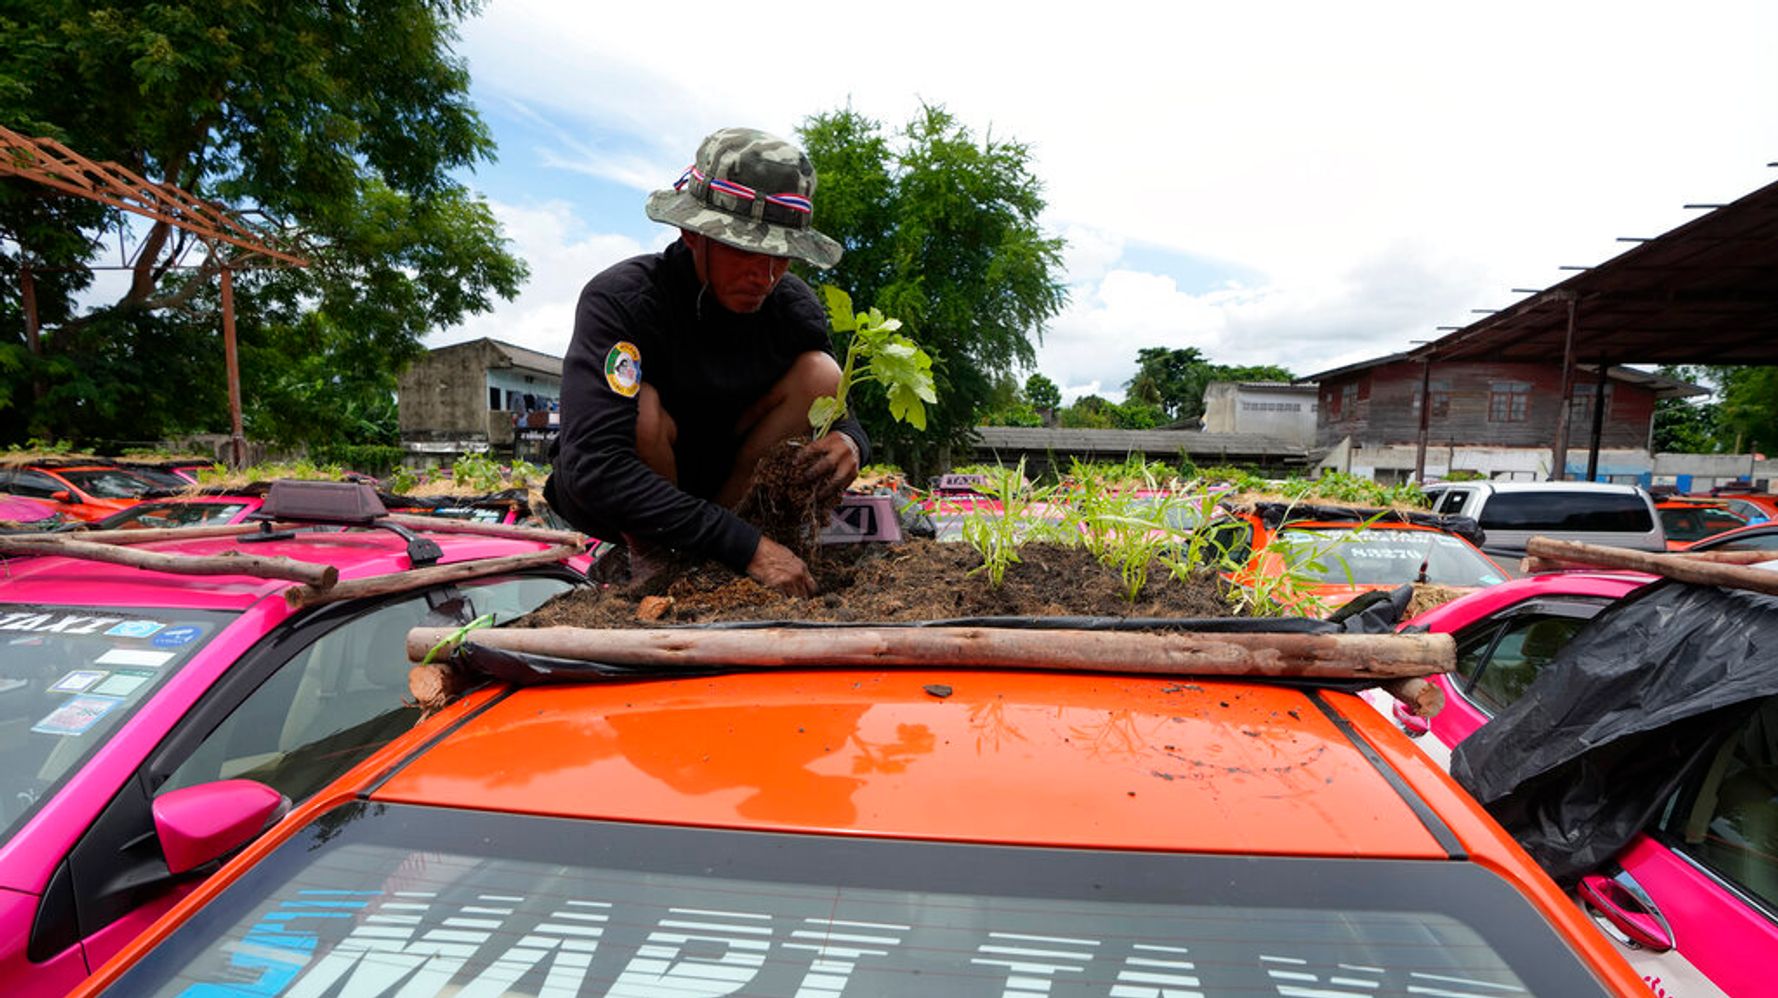 Thai Taxi Drivers Idled By COVID-19 Lockdowns Turn Car Roofs Into Gardens